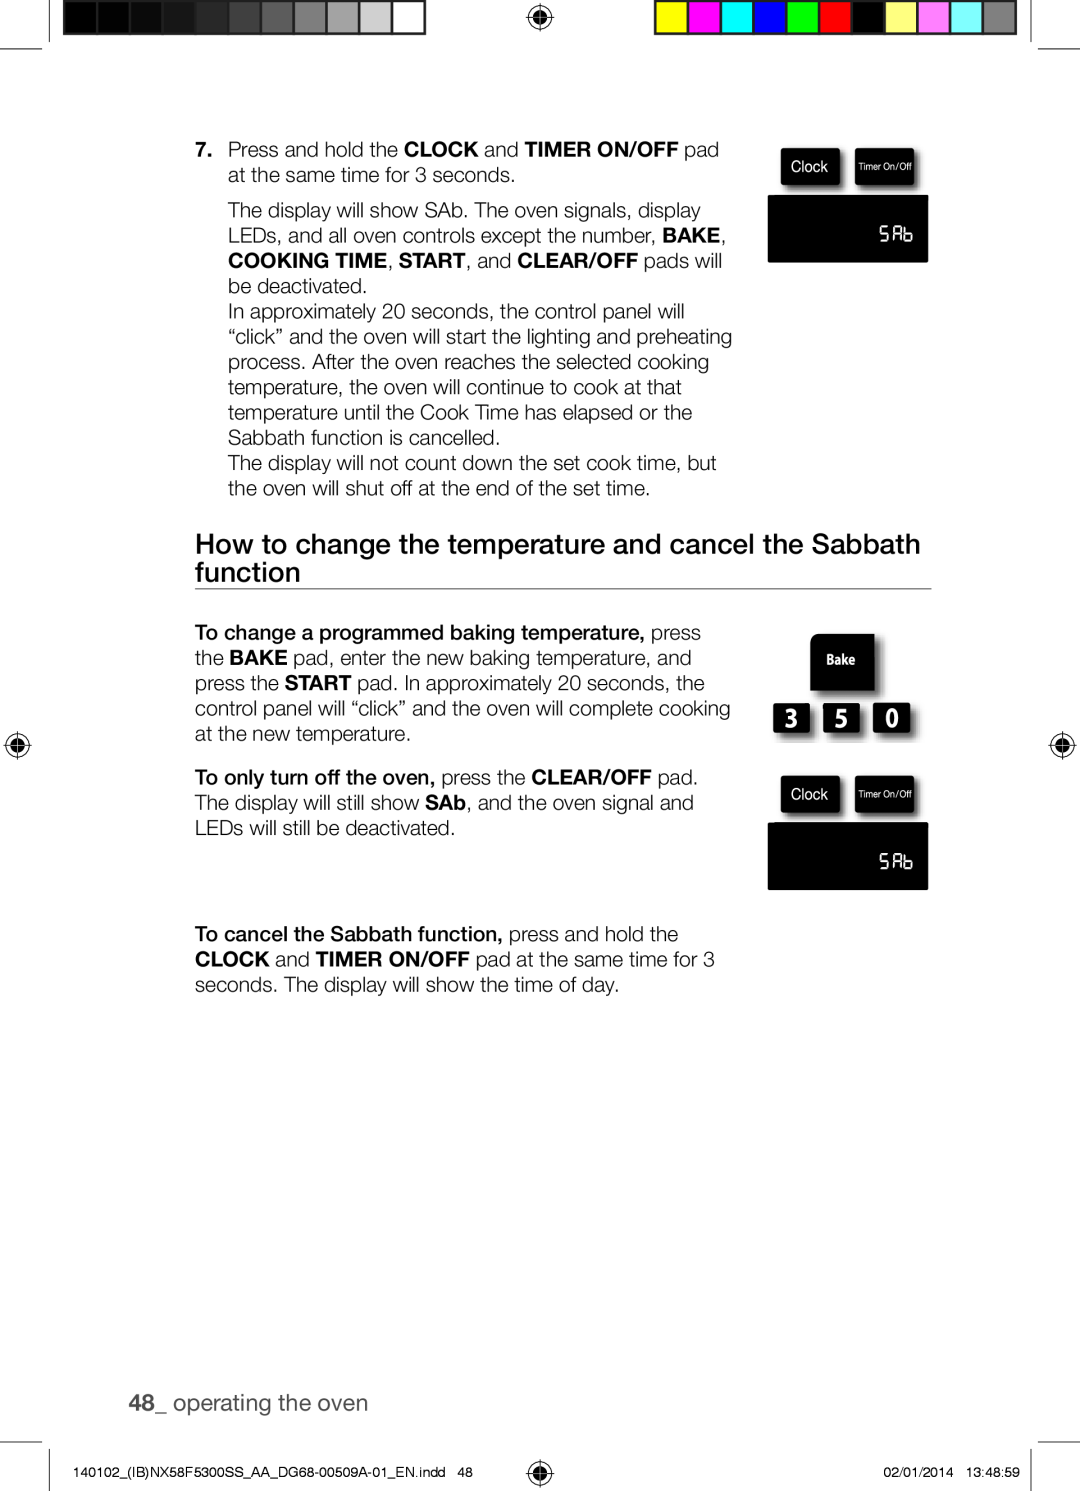 Samsung NX58F5500SW user manual How to change the temperature and cancel the Sabbath function, operating the oven 